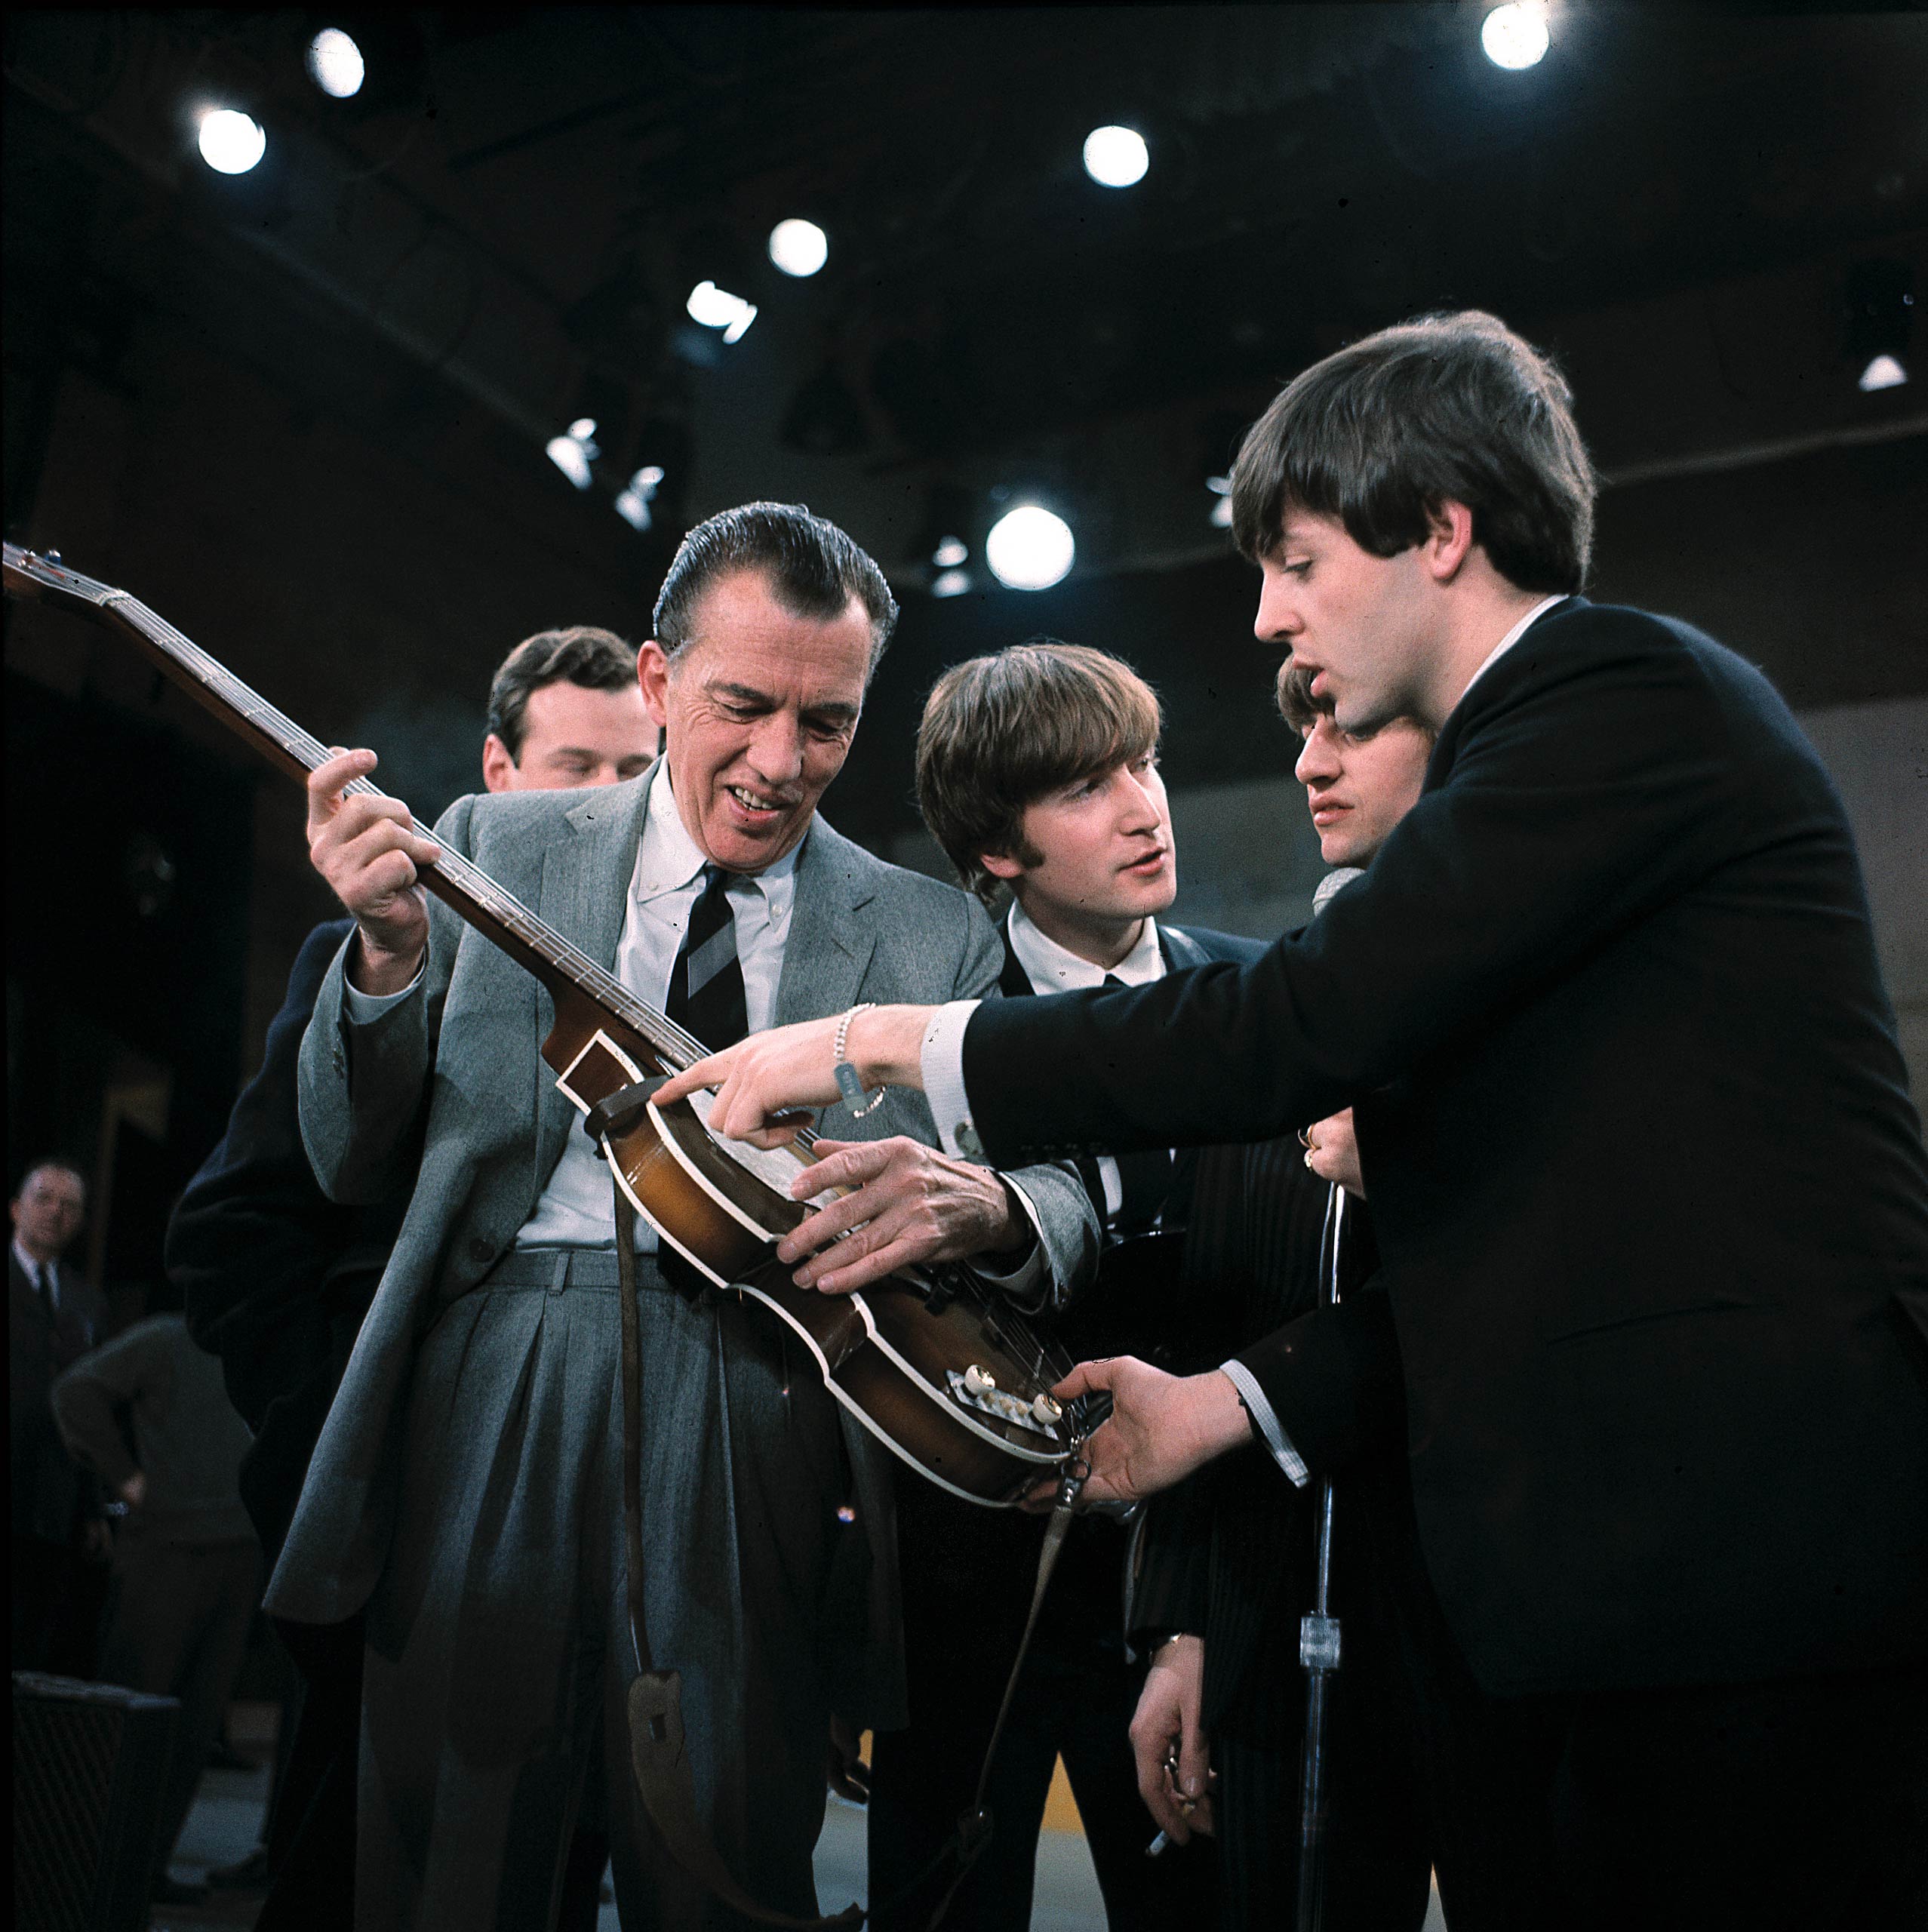 Paul McCartney, right, shows his guitar to Ed Sullivan before the Beatles' live television appearance on The Ed Sullivan Show in New York on Feb. 9, 1964.